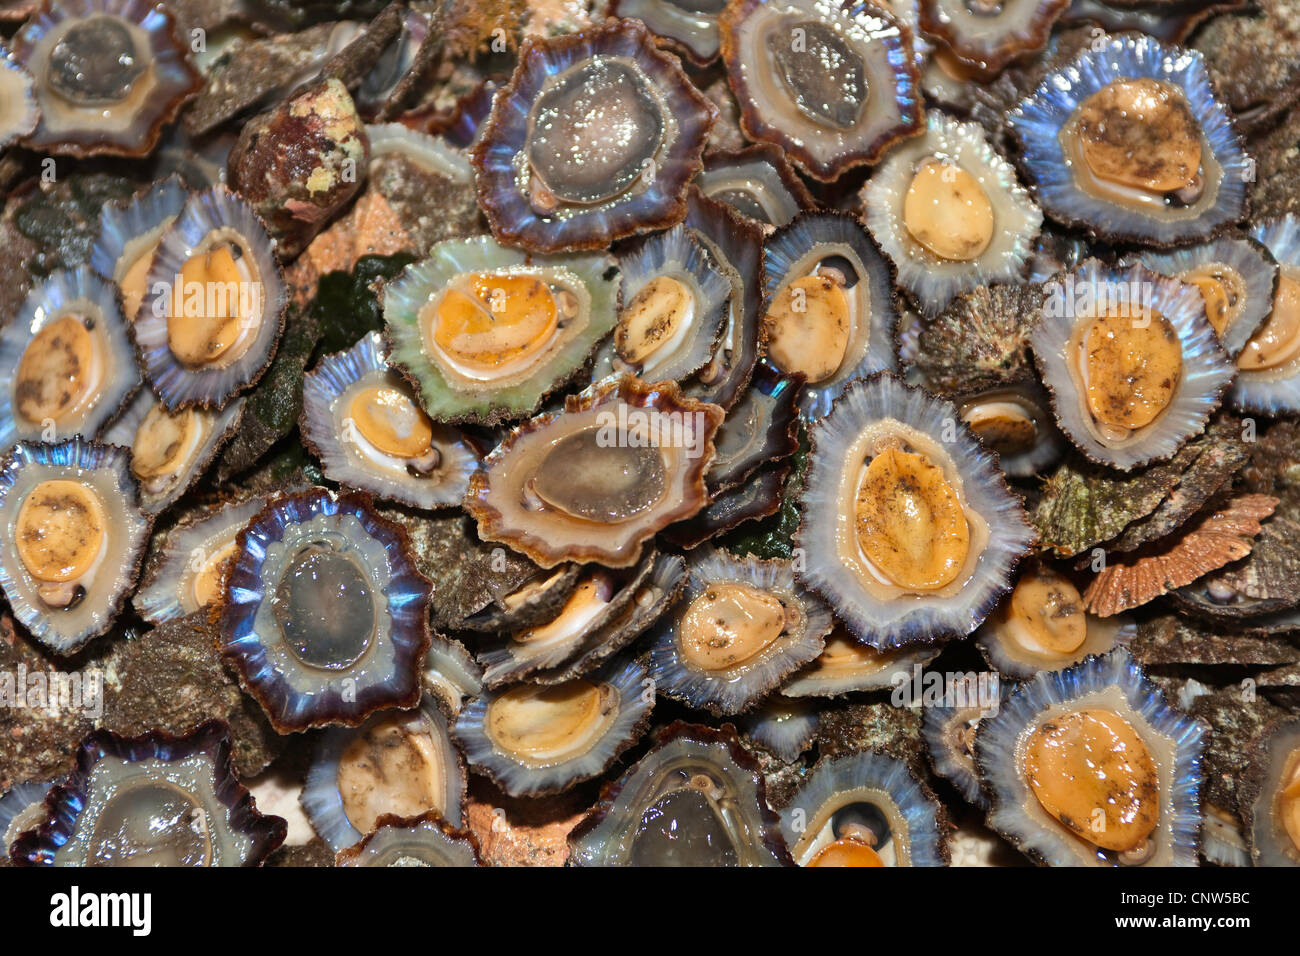 common limpet, common European limpet (Patella vulgata), in great number at a market stand, Portugal, Madeira, Funchal Stock Photo